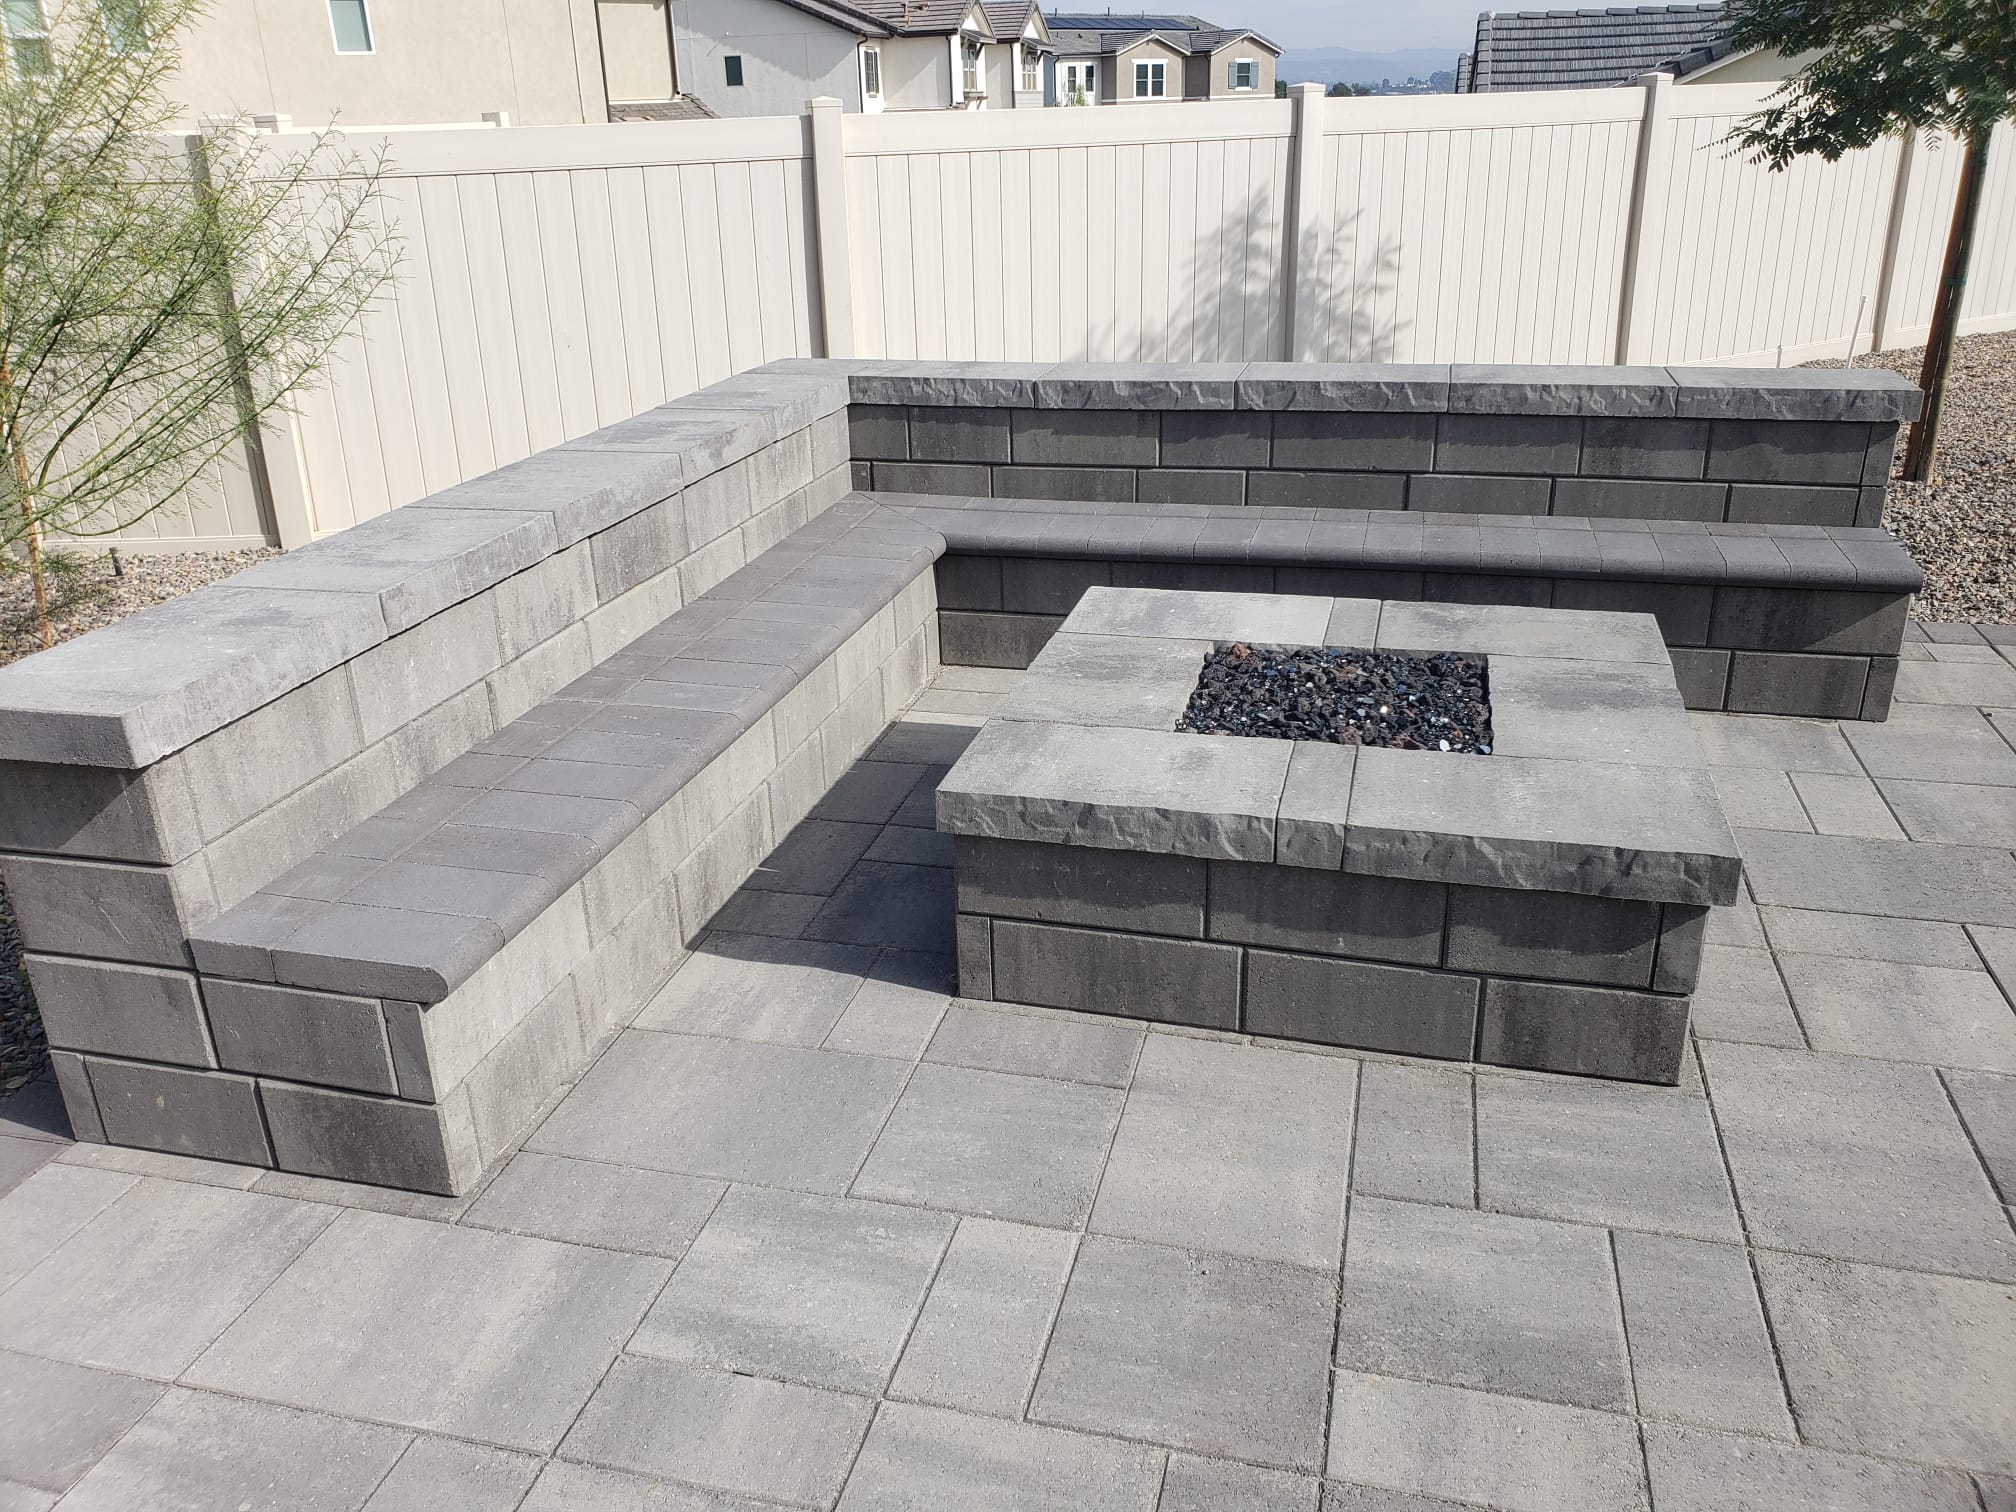 pavers installation, includes firepit, bench and a new pavers flooring